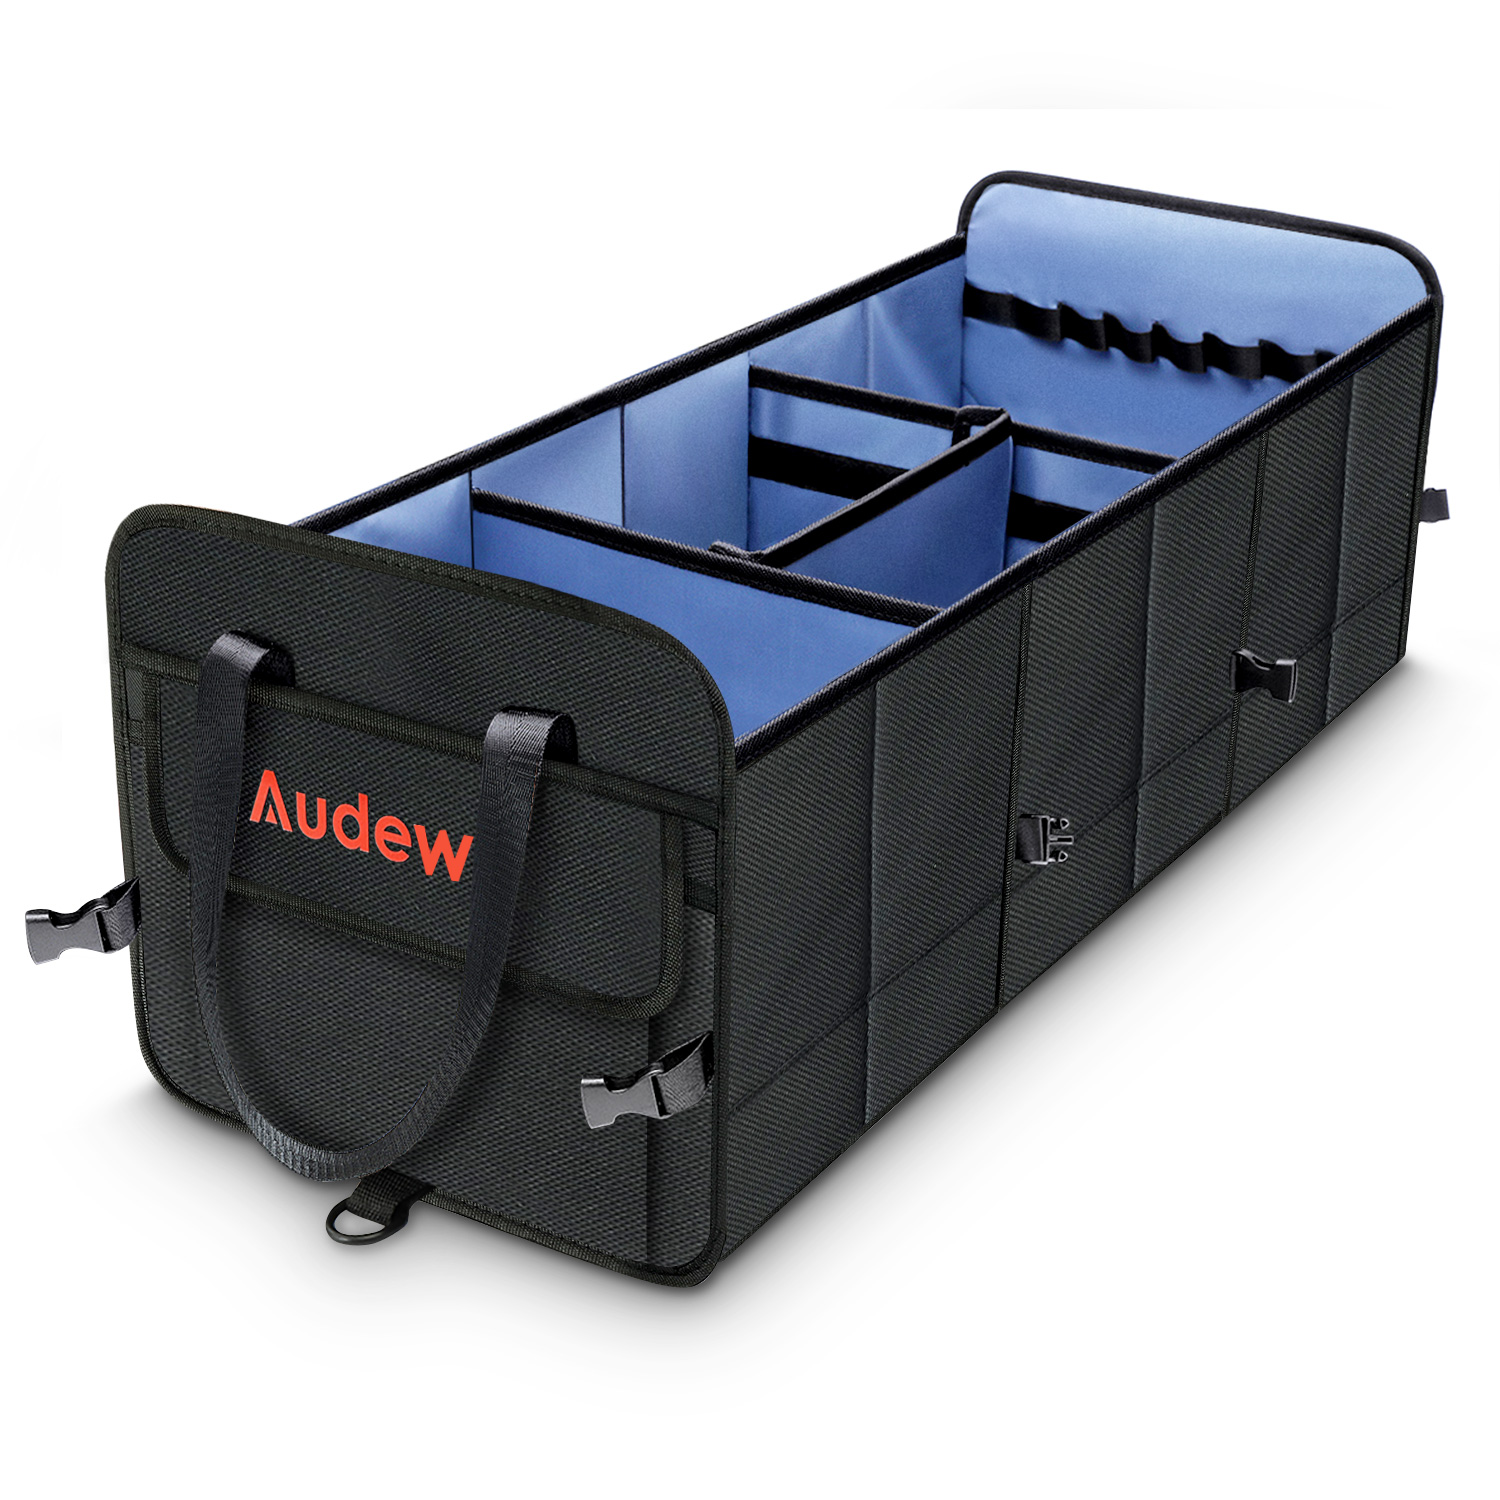 Audew Trunk Organizer Portable Car Storage Bag, Large Space to Store  Belongings for SUV, Vehicle, Truck, Auto, Grocery, Home & Garage